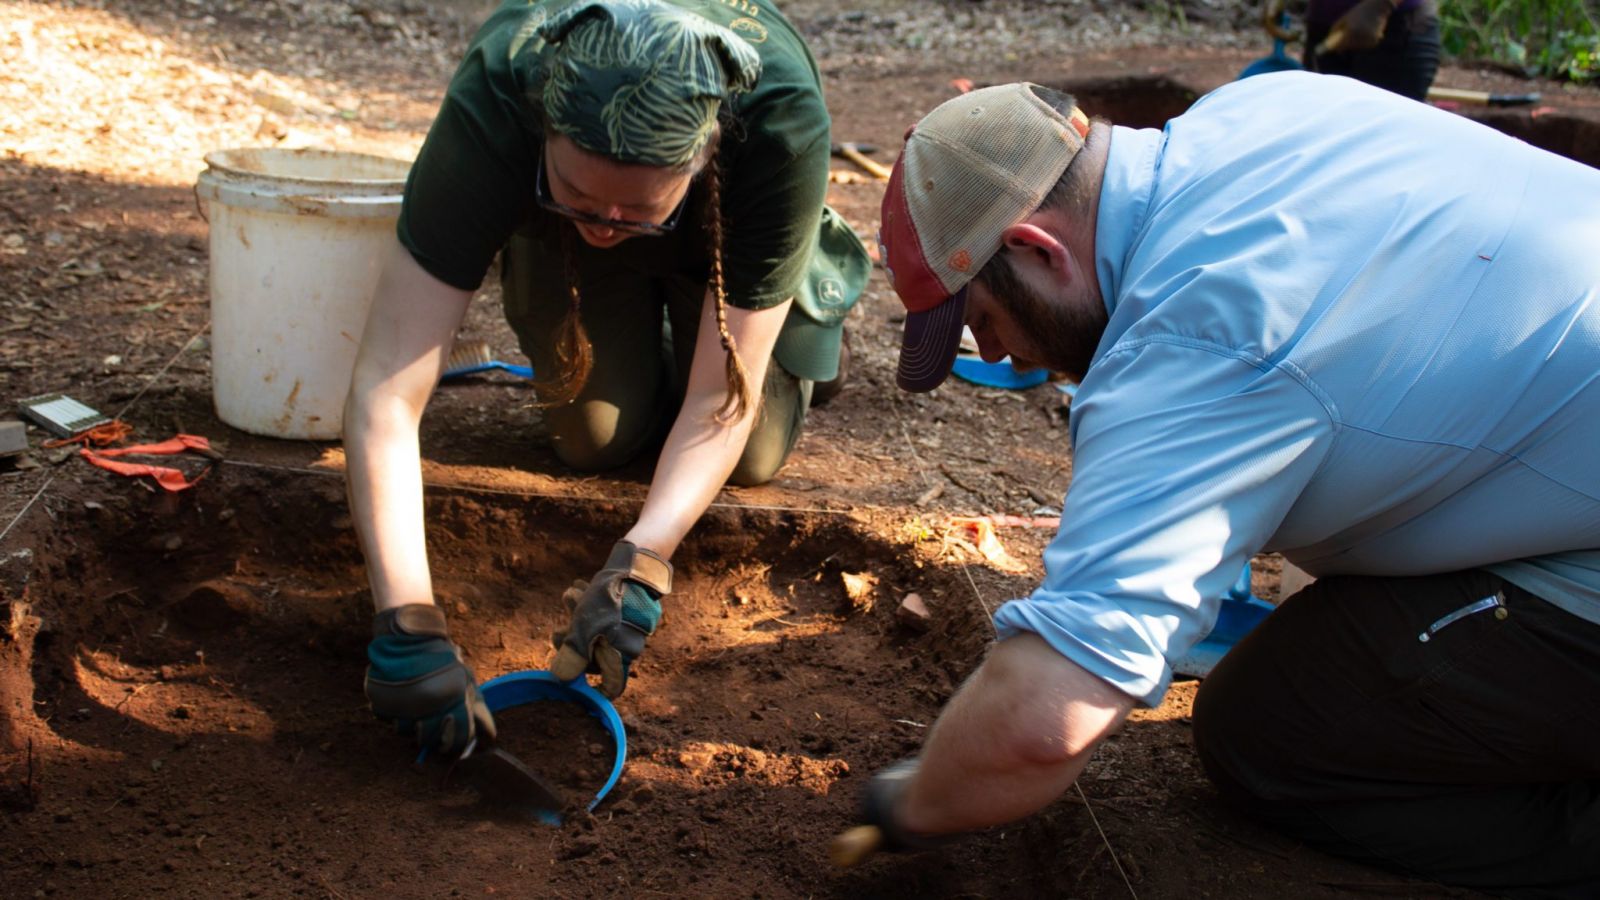 David Markus (right) joins an undergraduate student to carefully remove soil from the dig site. (Photo/Provided)